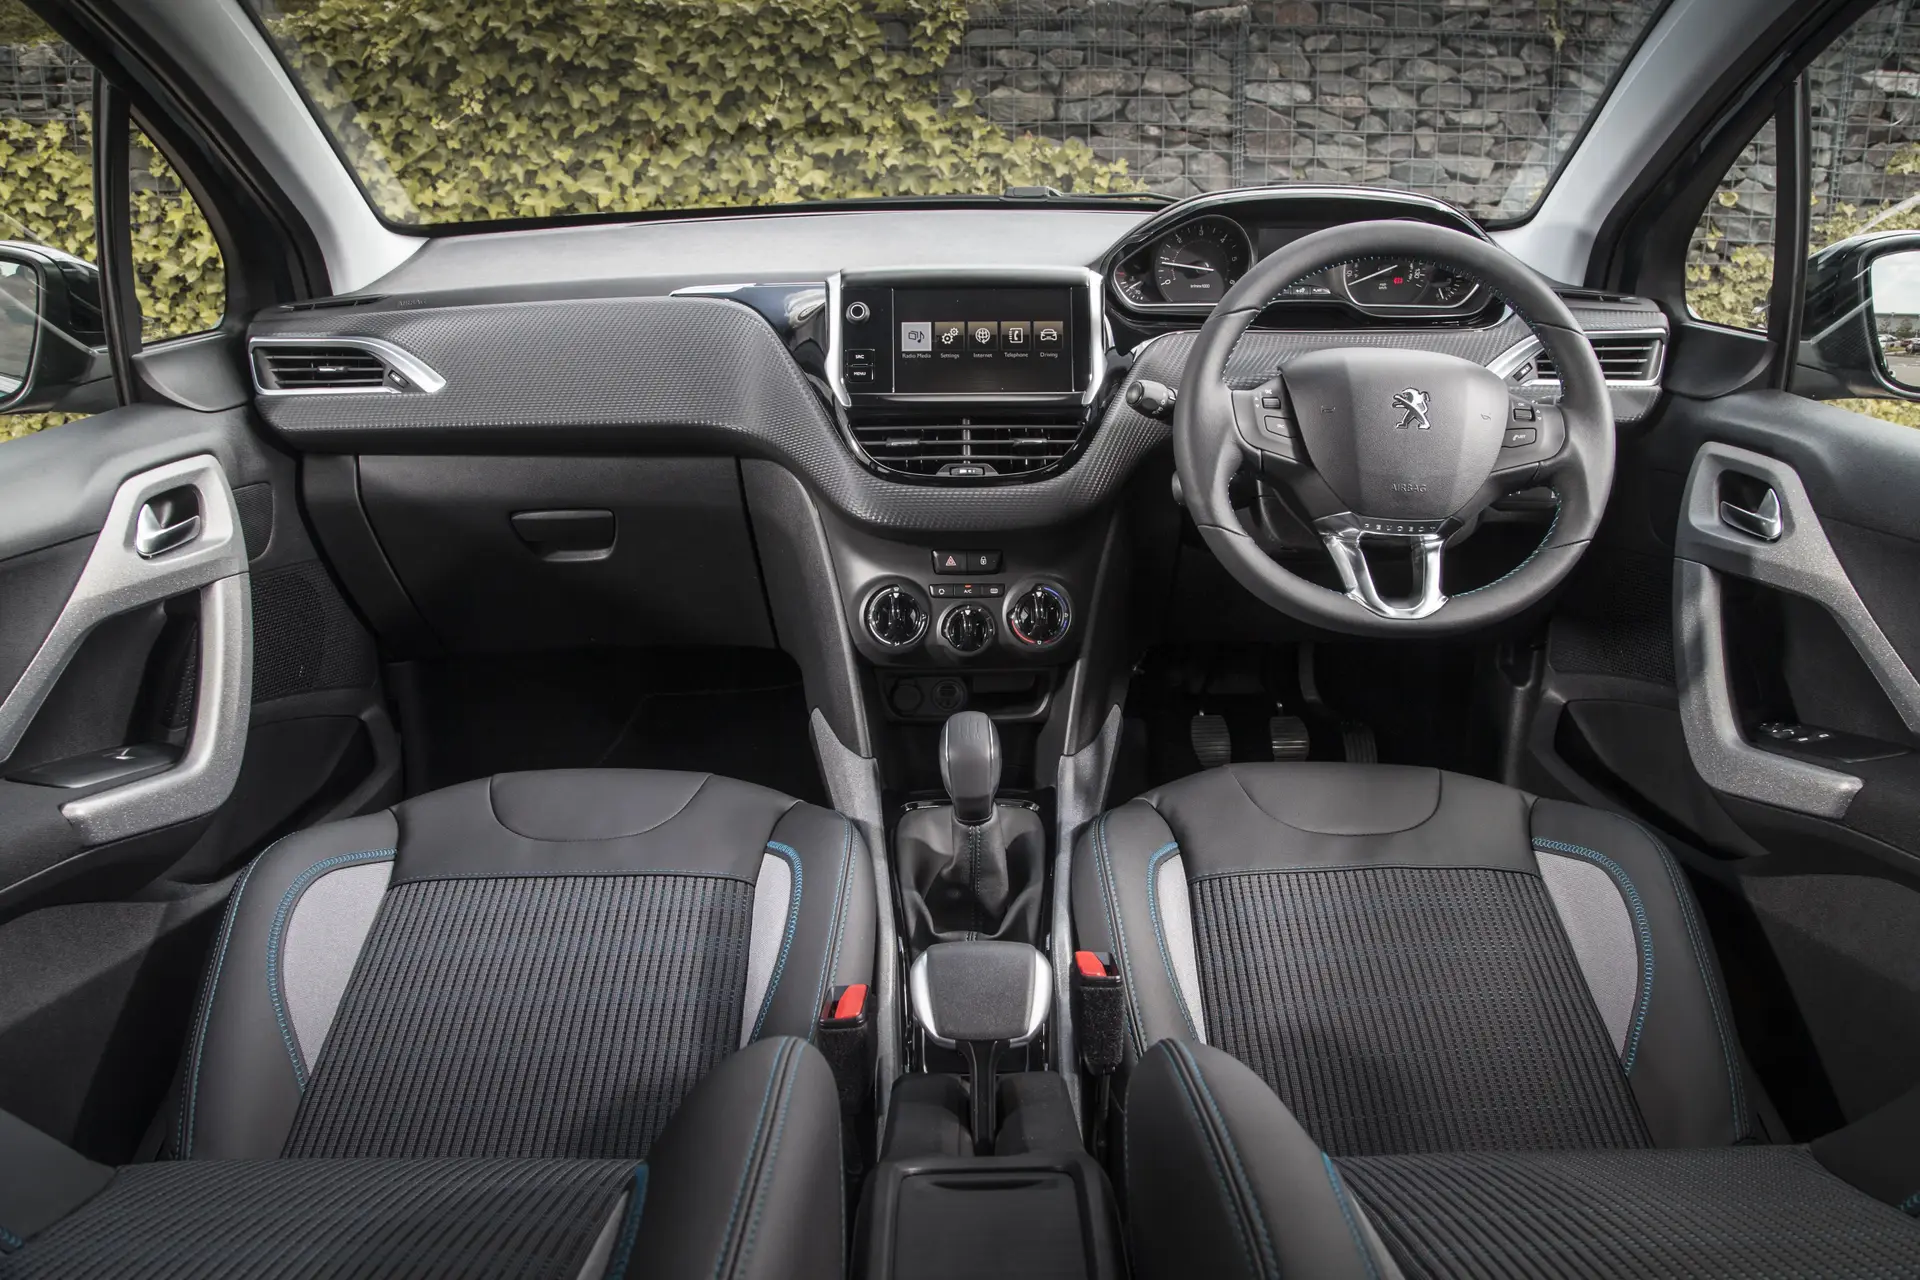 Peugeot 2008 (2013-2019) Review: interior close up photo of the Peugeot 2008 dashboard